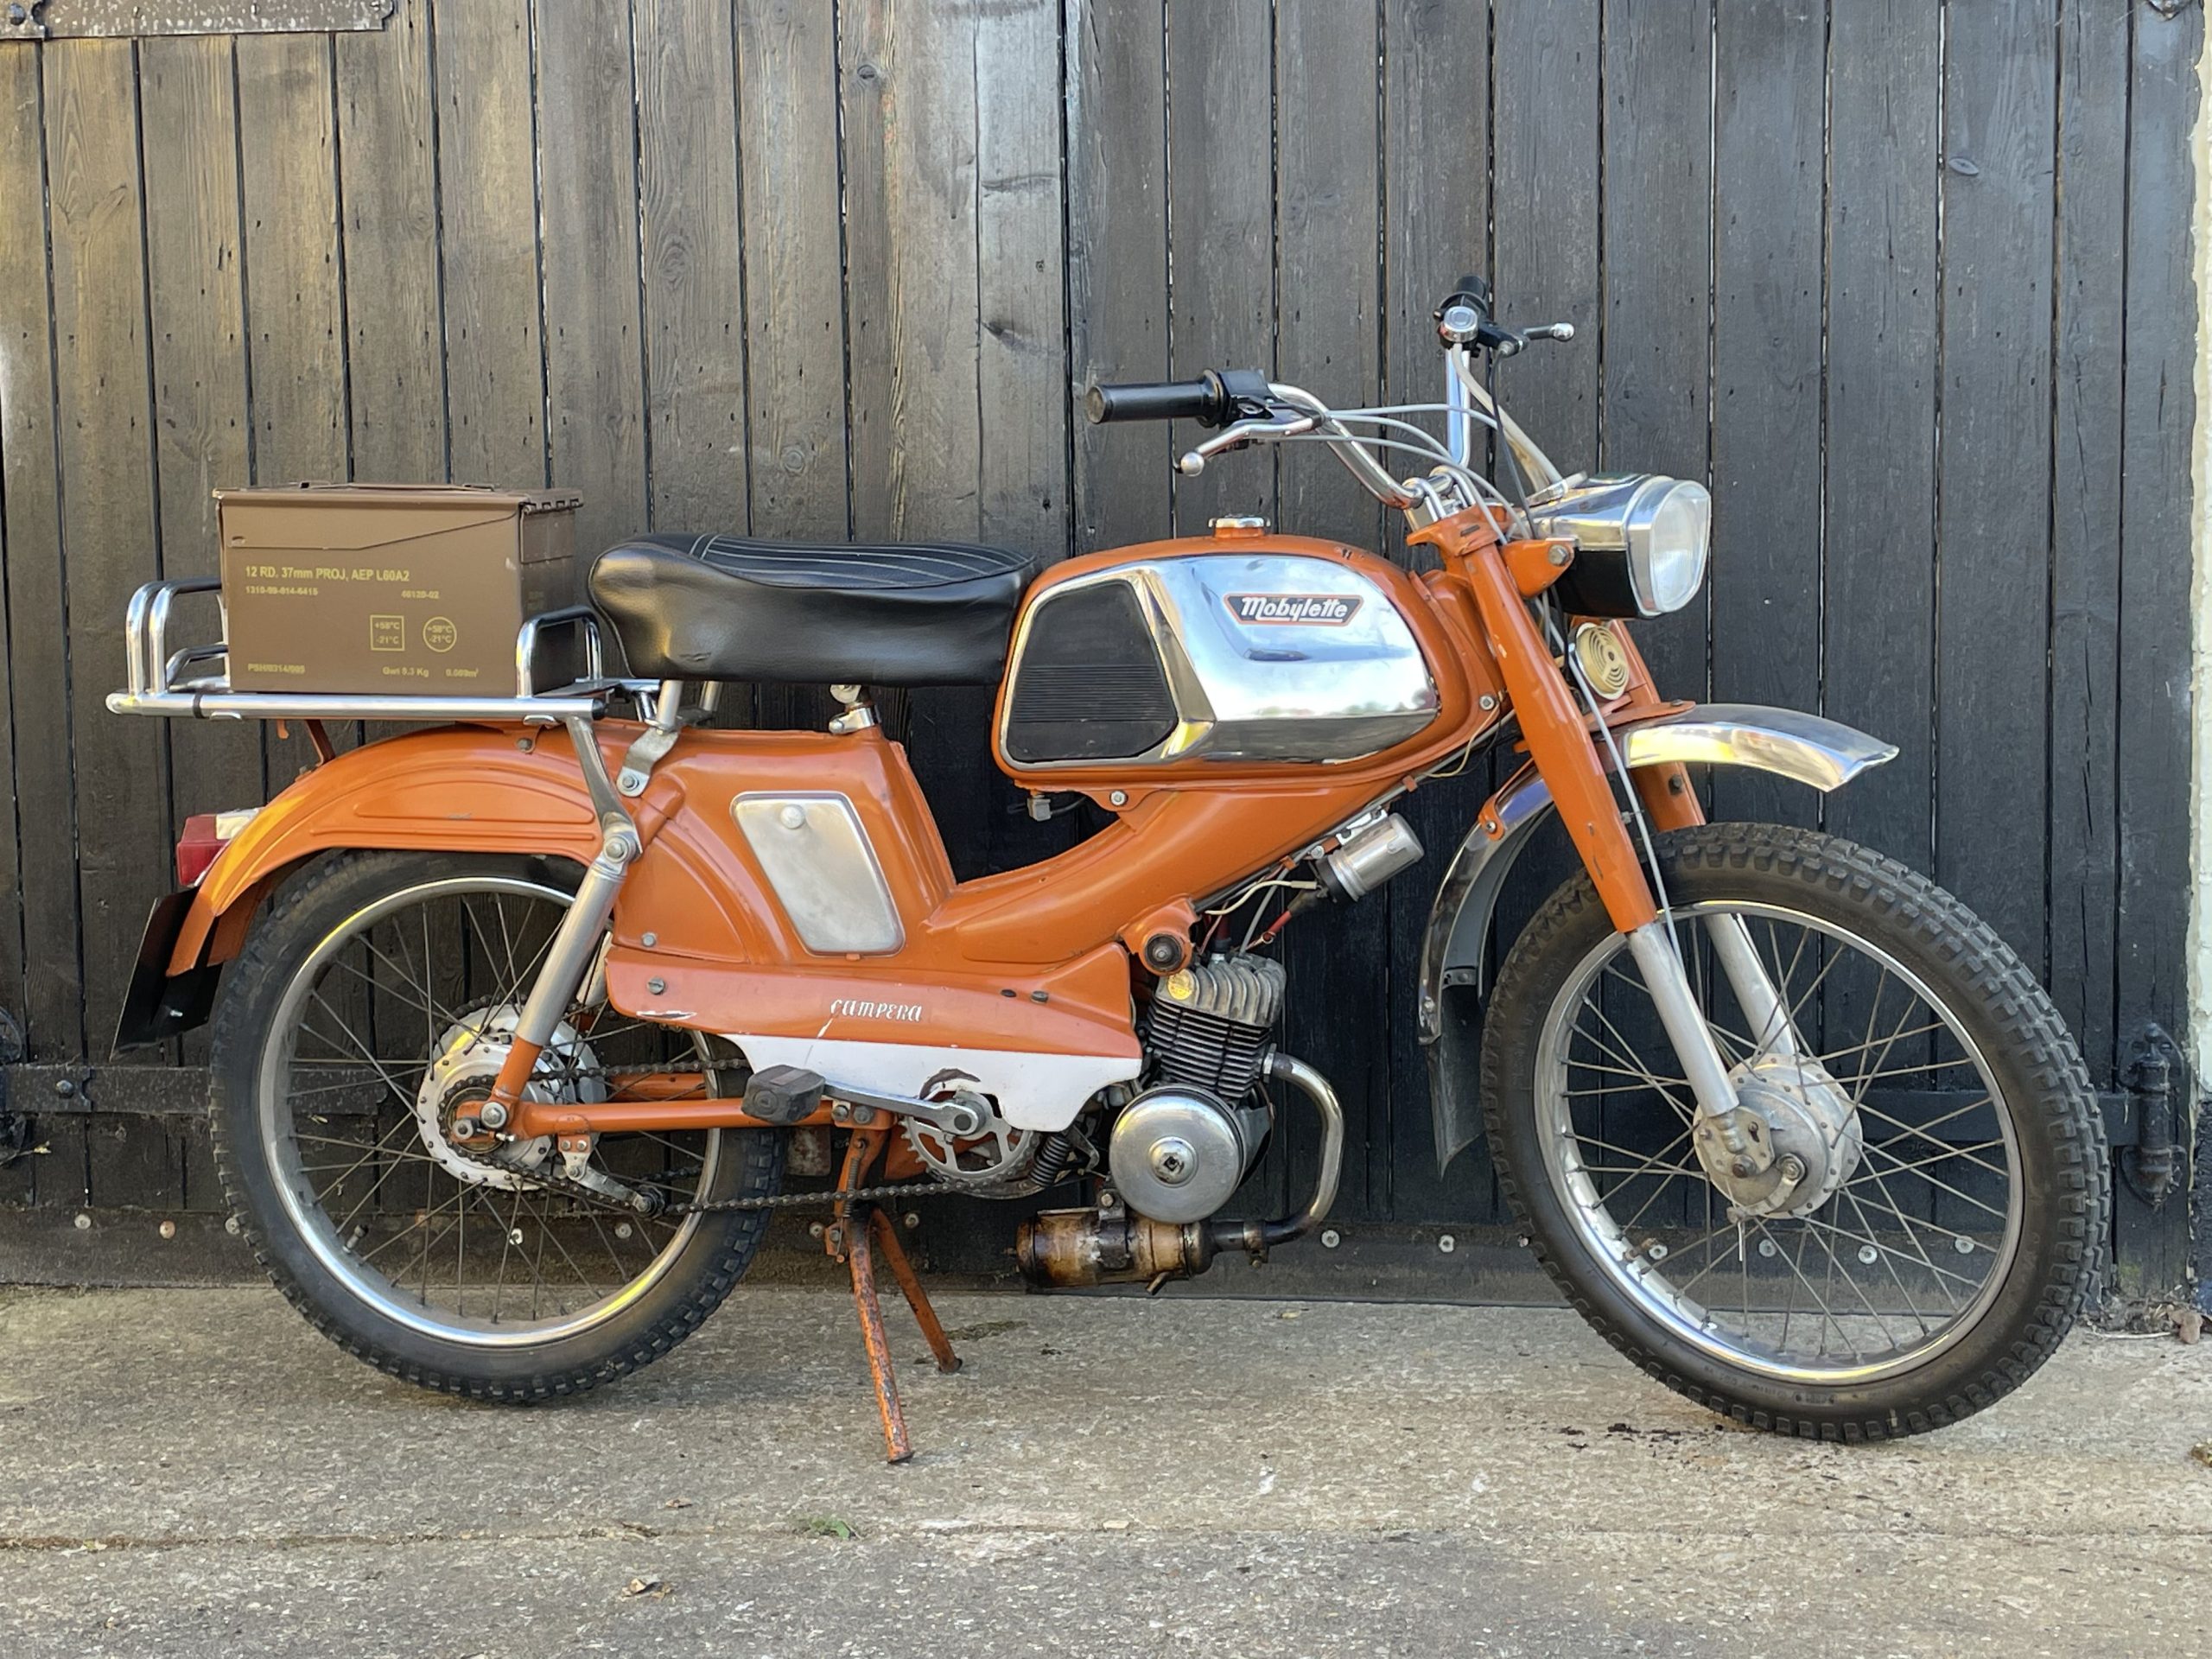 Mobylette sp-95 Campera, fully restored by me : r/Mobylette